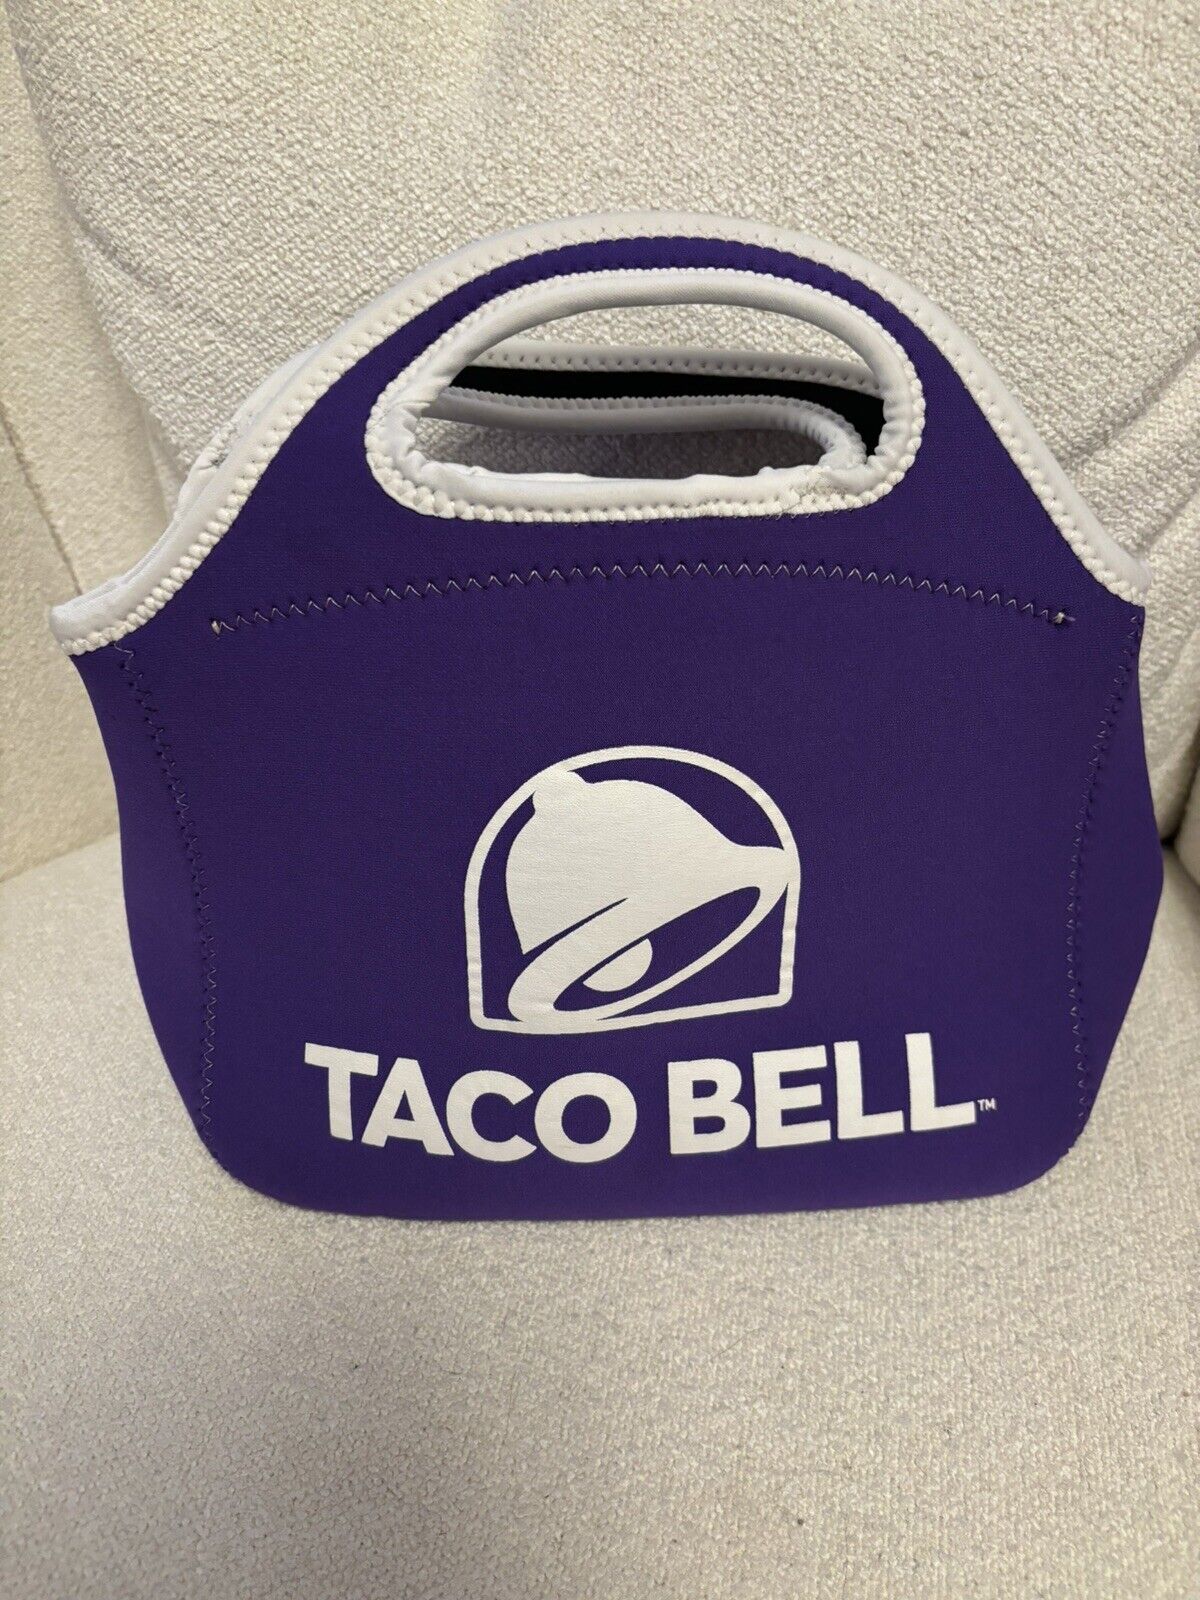 Cool Lunch Bag Taco Bell Neoprene Rare Fast Food Lunchbox